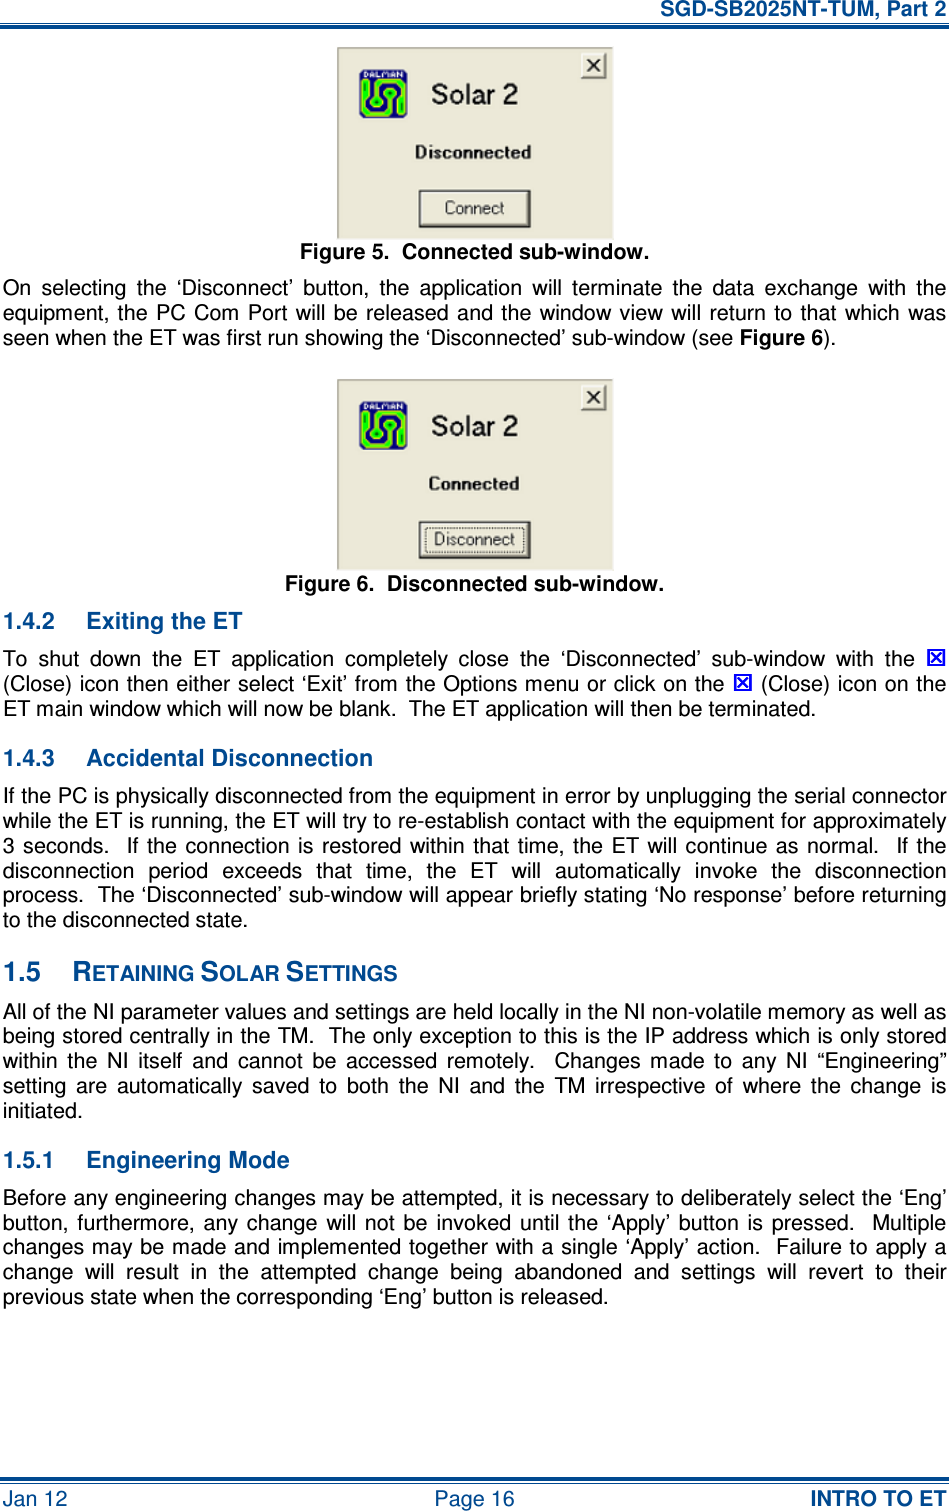   SGD-SB2025NT-TUM, Part 2 Jan 12  Page 16  INTRO TO ET Figure 5.  Connected sub-window. On  selecting  the  ‘Disconnect’  button,  the  application  will  terminate  the  data  exchange  with  the equipment, the PC Com Port will be released and the window view will return to  that which was seen when the ET was first run showing the ‘Disconnected’ sub-window (see Figure 6). Figure 6.  Disconnected sub-window. 1.4.2  Exiting the ET To  shut  down  the  ET  application  completely  close  the  ‘Disconnected’  sub-window  with  the  (Close) icon then either select ‘Exit’ from the Options menu or click on the  (Close) icon on the ET main window which will now be blank.  The ET application will then be terminated. 1.4.3  Accidental Disconnection If the PC is physically disconnected from the equipment in error by unplugging the serial connector while the ET is running, the ET will try to re-establish contact with the equipment for approximately 3 seconds.   If the  connection is  restored  within that time,  the  ET  will continue as normal.    If the disconnection  period  exceeds  that  time,  the  ET  will  automatically  invoke  the  disconnection process.  The ‘Disconnected’ sub-window will appear briefly stating ‘No response’ before returning to the disconnected state. 1.5  RETAINING SOLAR SETTINGS All of the NI parameter values and settings are held locally in the NI non-volatile memory as well as being stored centrally in the TM.  The only exception to this is the IP address which is only stored within  the  NI  itself  and  cannot  be  accessed  remotely.    Changes  made  to  any  NI  “Engineering” setting  are  automatically  saved  to  both  the  NI  and  the  TM  irrespective  of  where  the  change  is initiated. 1.5.1  Engineering Mode Before any engineering changes may be attempted, it is necessary to deliberately select the ‘Eng’ button, furthermore,  any change  will  not  be  invoked  until the  ‘Apply’ button  is  pressed.   Multiple changes may be made and implemented together with a single ‘Apply’ action.  Failure to apply a change  will  result  in  the  attempted  change  being  abandoned  and  settings  will  revert  to  their previous state when the corresponding ‘Eng’ button is released.  